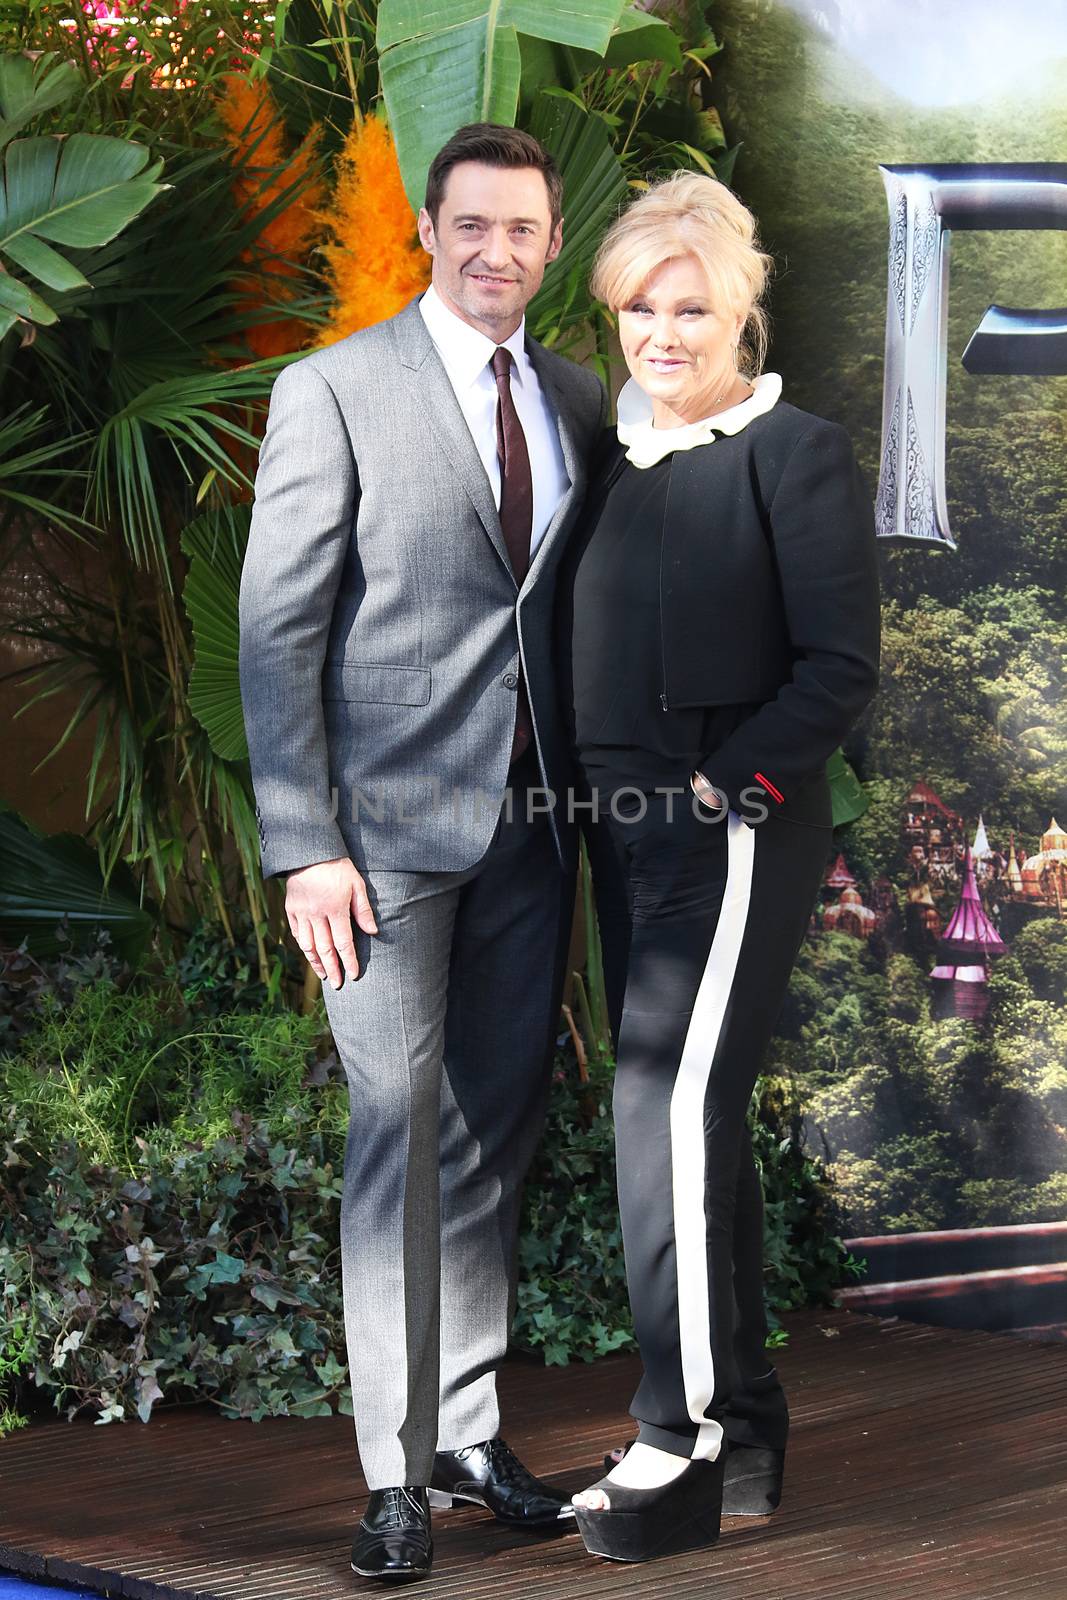 UNITED KINGDOM, London: Hugh Jackman and Deborra-Lee Furness were among the stars to hit the red carpet in London for Joe Wright's Pan, a prequel to J.M. Barrie's classic Peter Pan stories, on September 20, 2015.